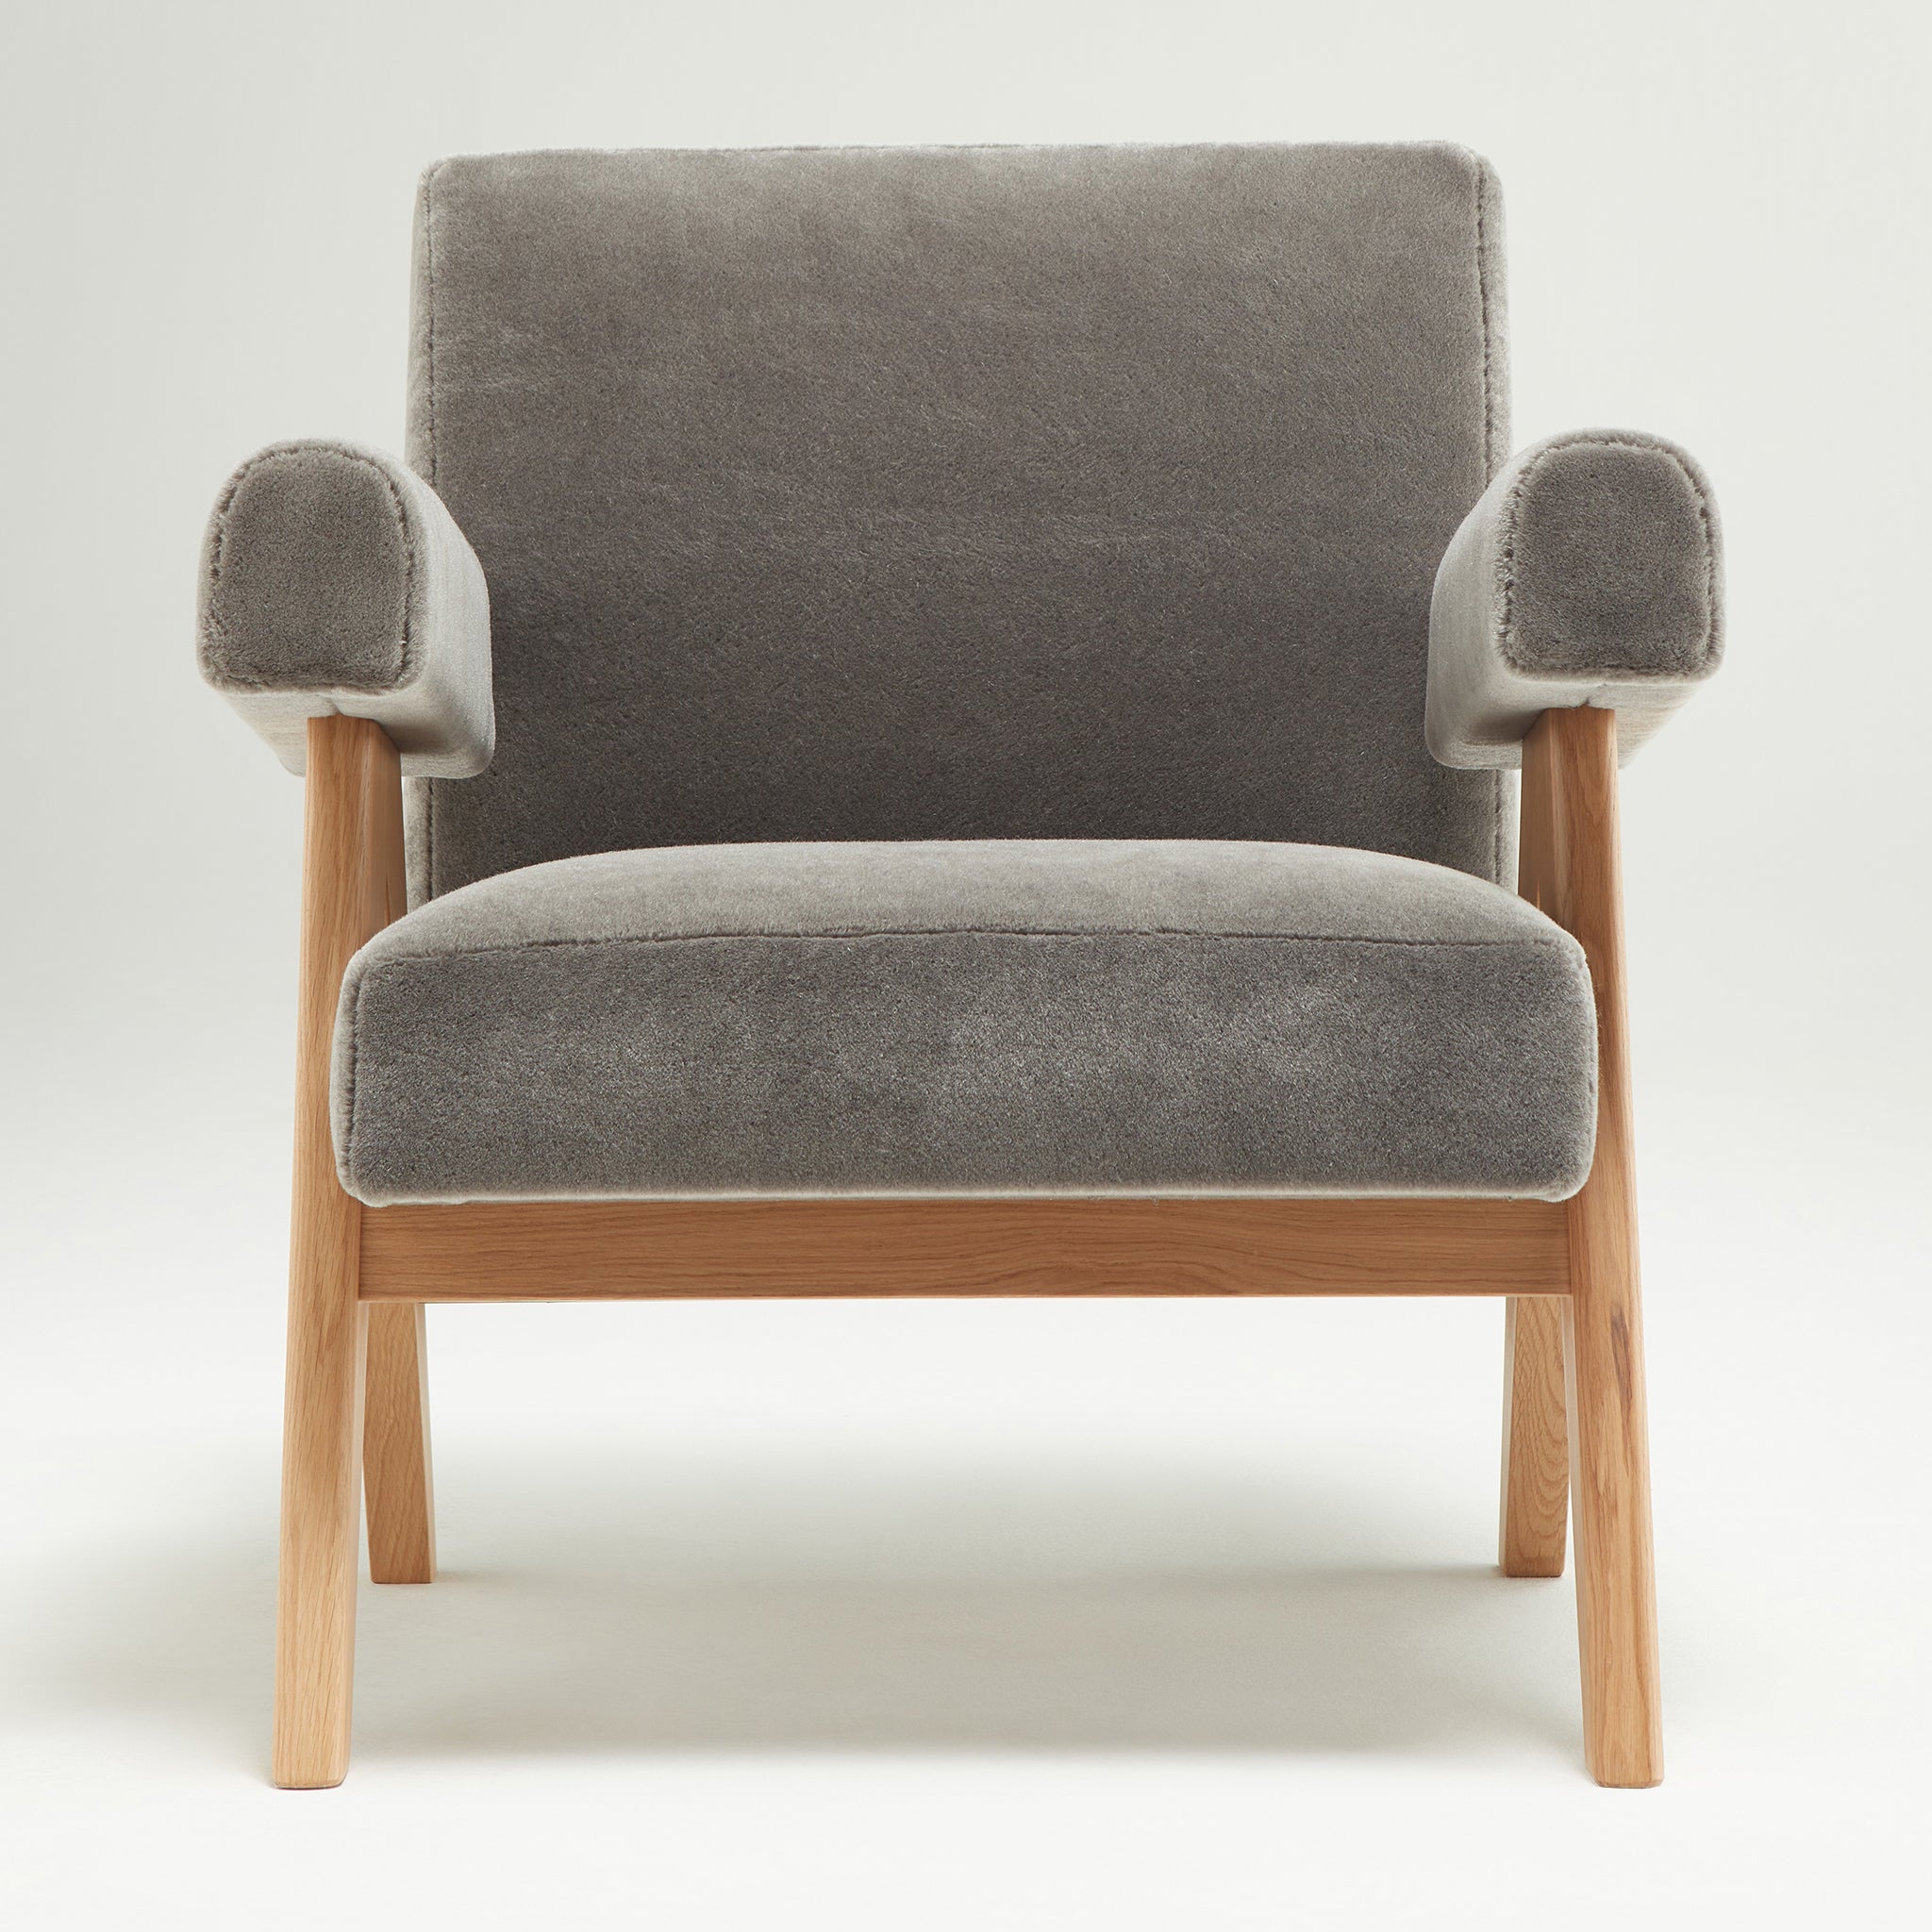 Front view of an authentic chandigarh lounge chair, pierre jeanneret era, natural oak frame, pierre frey elephant teddy mohair upholstery, by Klarel #K35-34